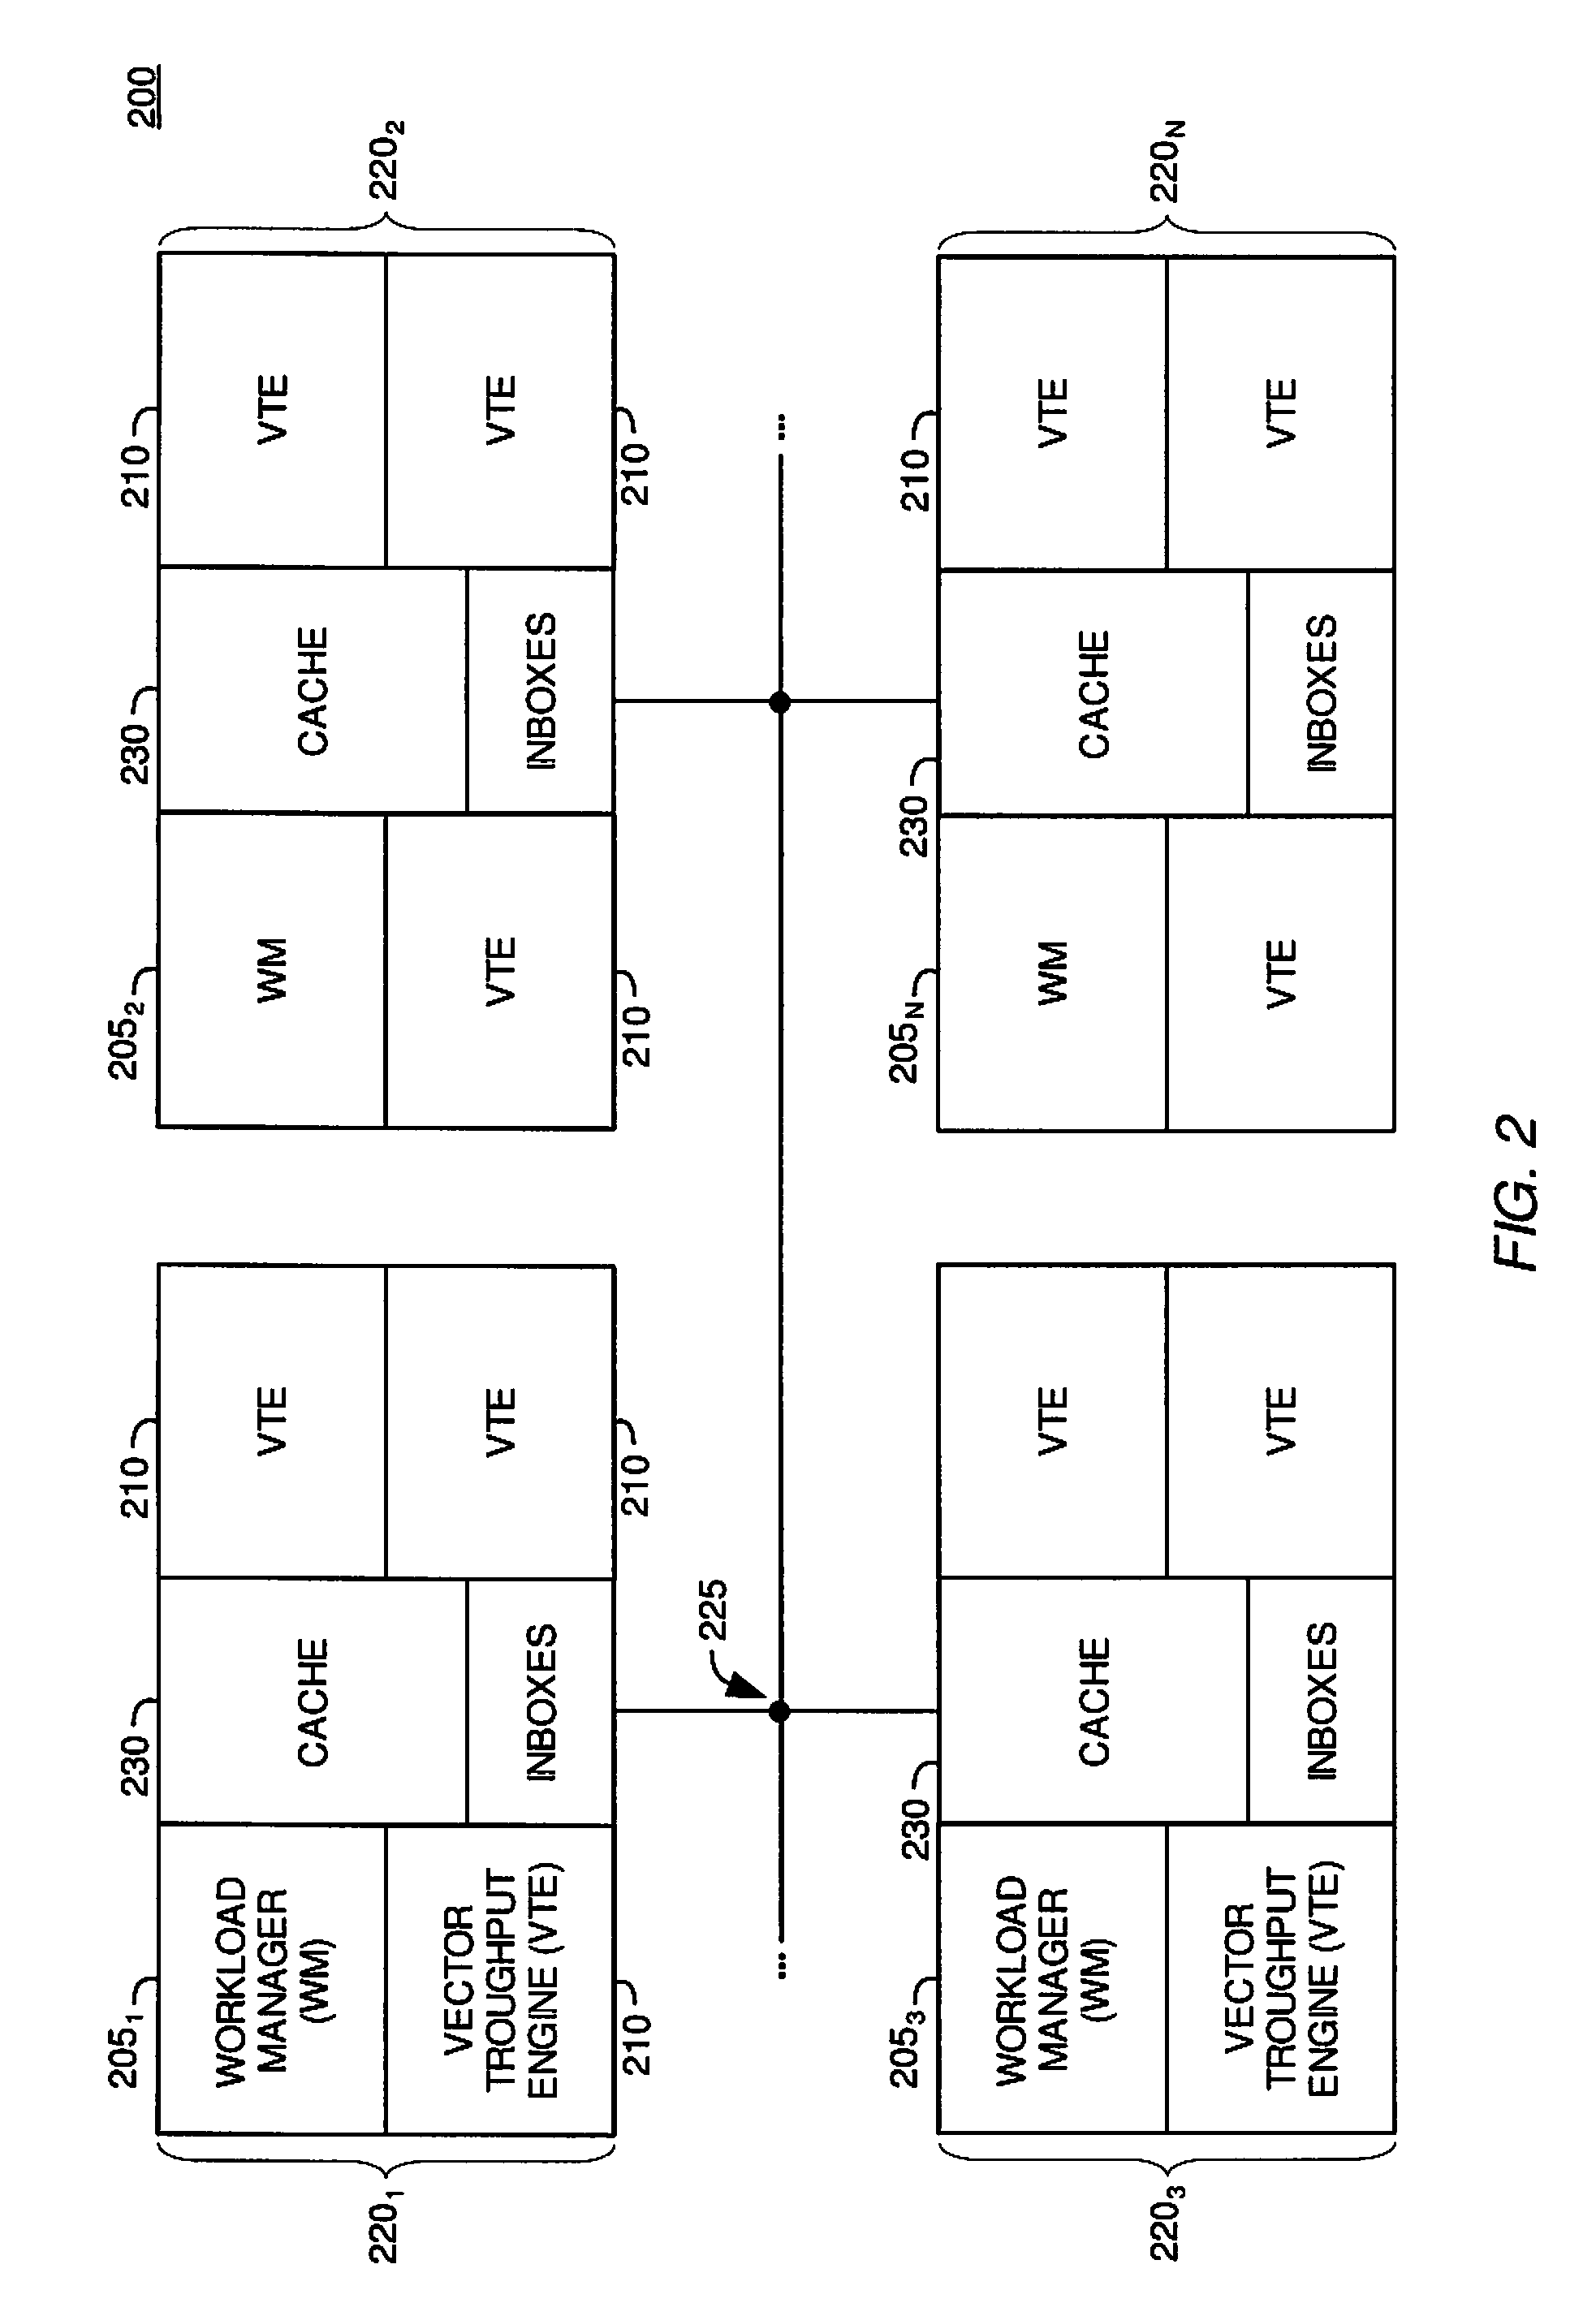 Cache Utilization Optimized Ray Traversal Algorithm with Minimized Memory Bandwidth Requirements